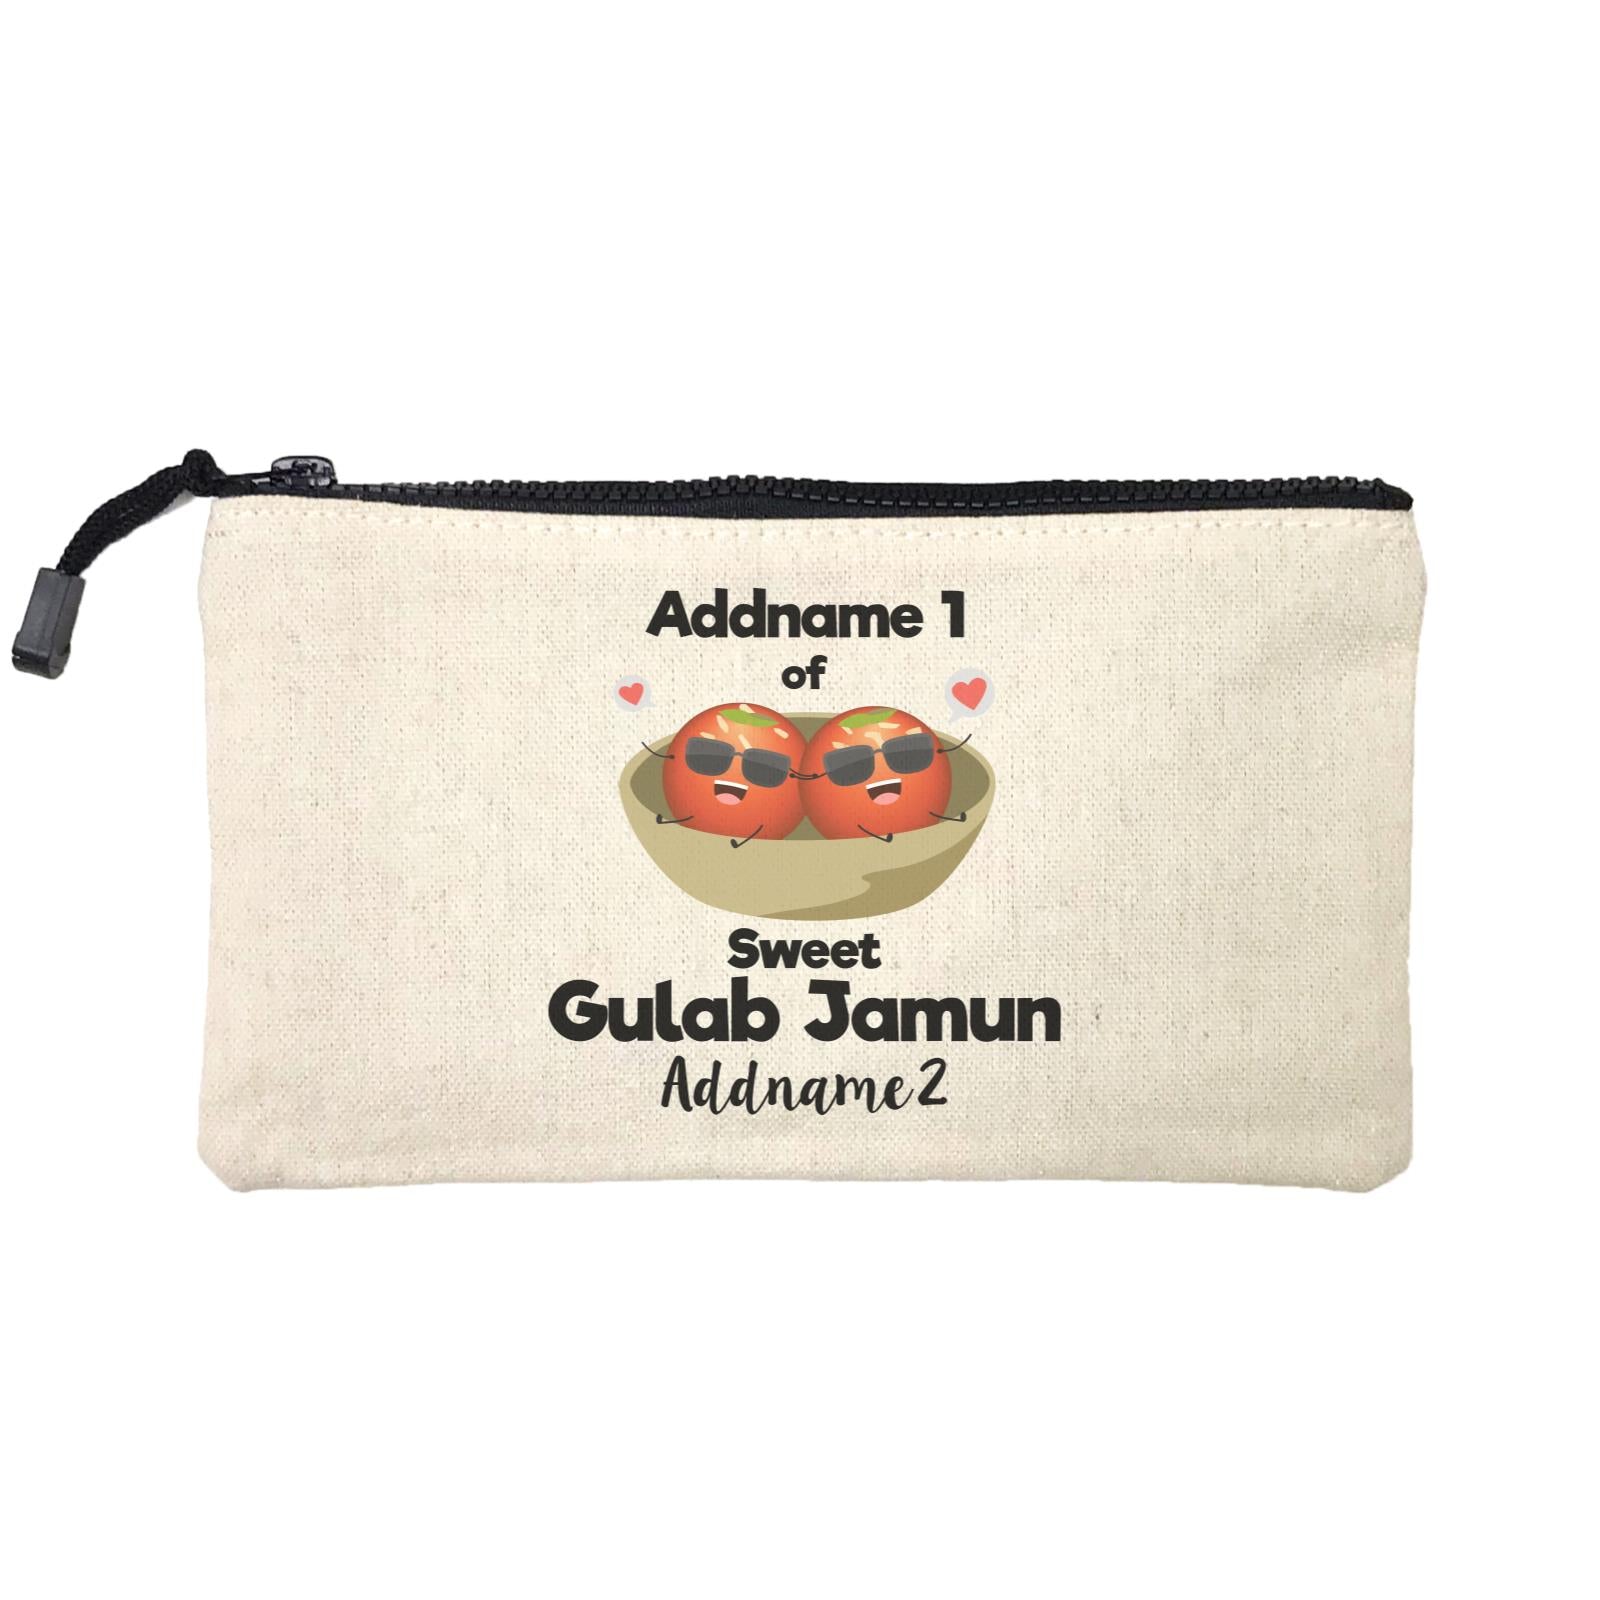 Addname 1 of Sweet Gulab Jamun Addname 2 Mini Accessories Stationery Pouch